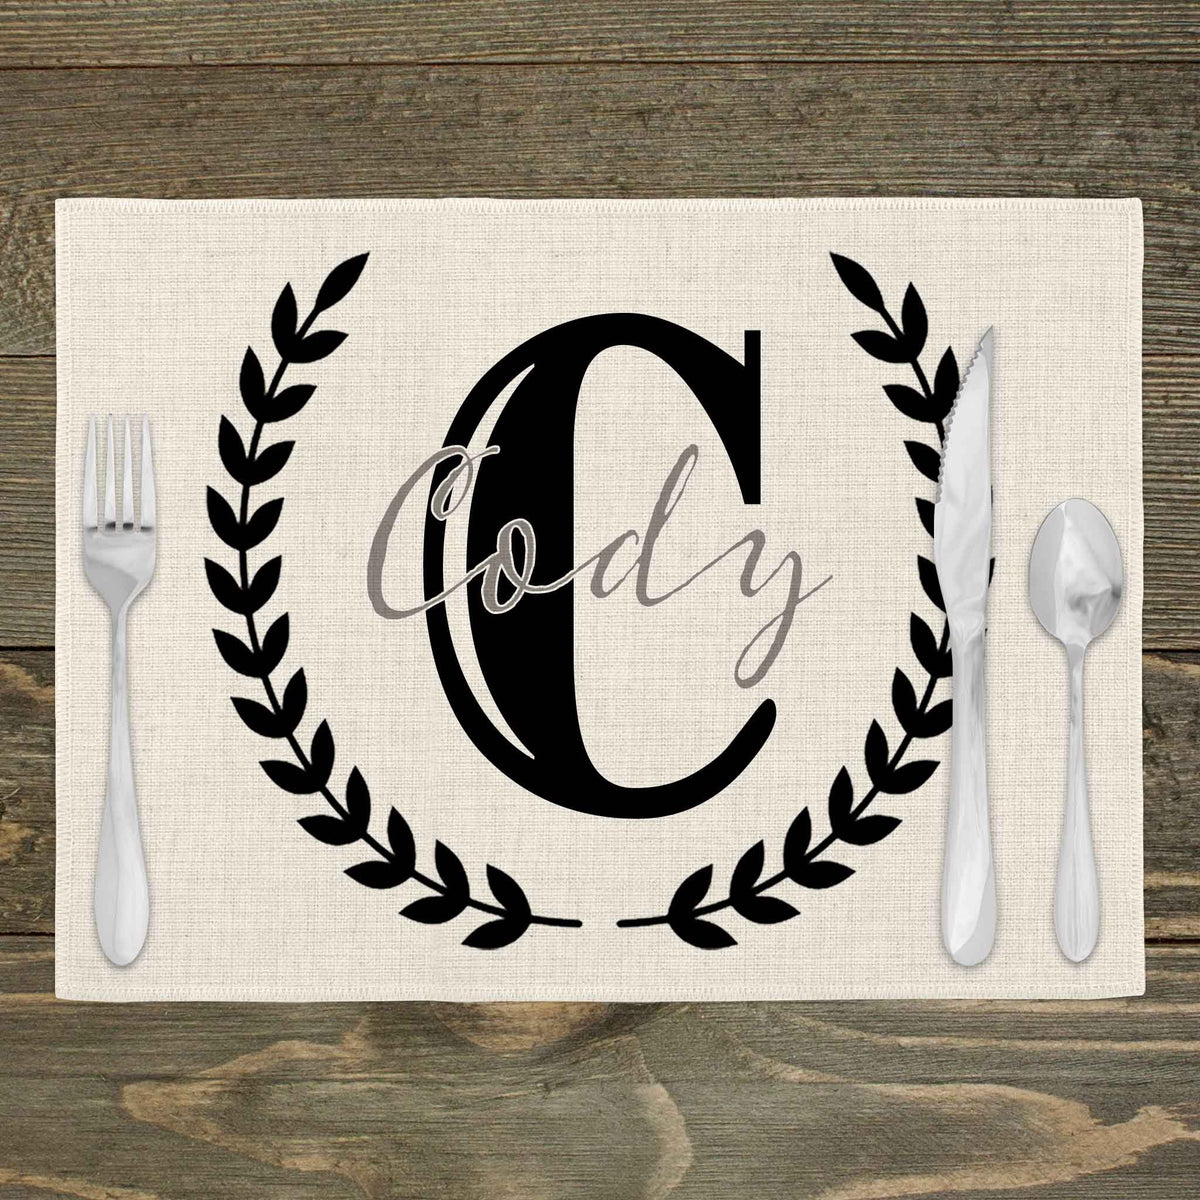 Custom Placemats | Personalized Dining and Serving | Laurel Wreath Ridge